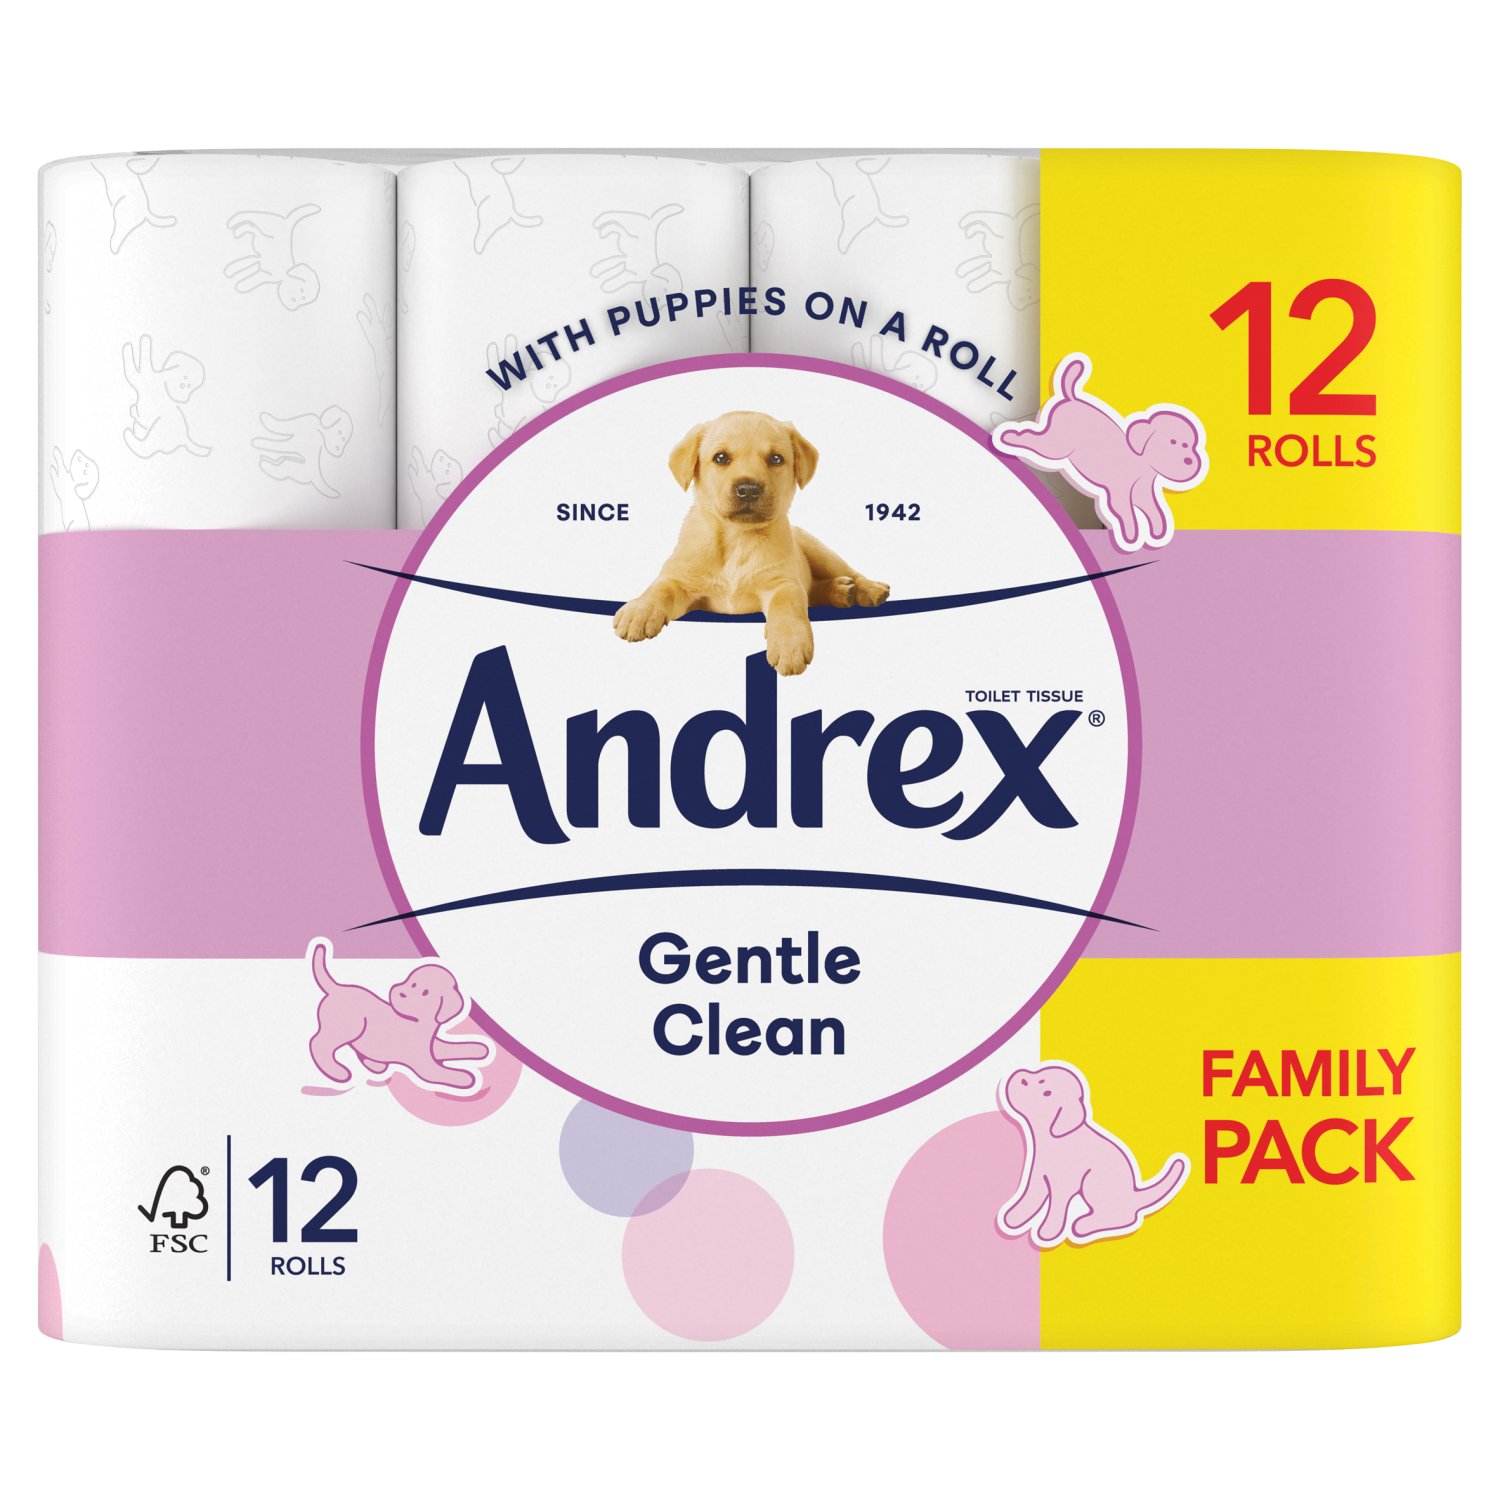 "Andrex® Gentle Clean Toilet Tissue is specifically designed to clean you and your family with a touch of softness. Plus, each toilet roll is uniquely Andrex®, with the loveable Andrex® puppy embossed on every sheet to confidently care for your family. Use Andrex® Toilet Tissue and Andrex® Washlets™ Moist Toilet Tissue for all day freshness†.

Every pack of Andrex® Gentle Clean Toilet Tissue is made using 30% recycled plastic and is still 100% recyclable. Visit our website to find out more about our 2030 sustainability mission and how we are leaving a greener pawprint.

 †vs. using Dry Bath Tissue alone."
